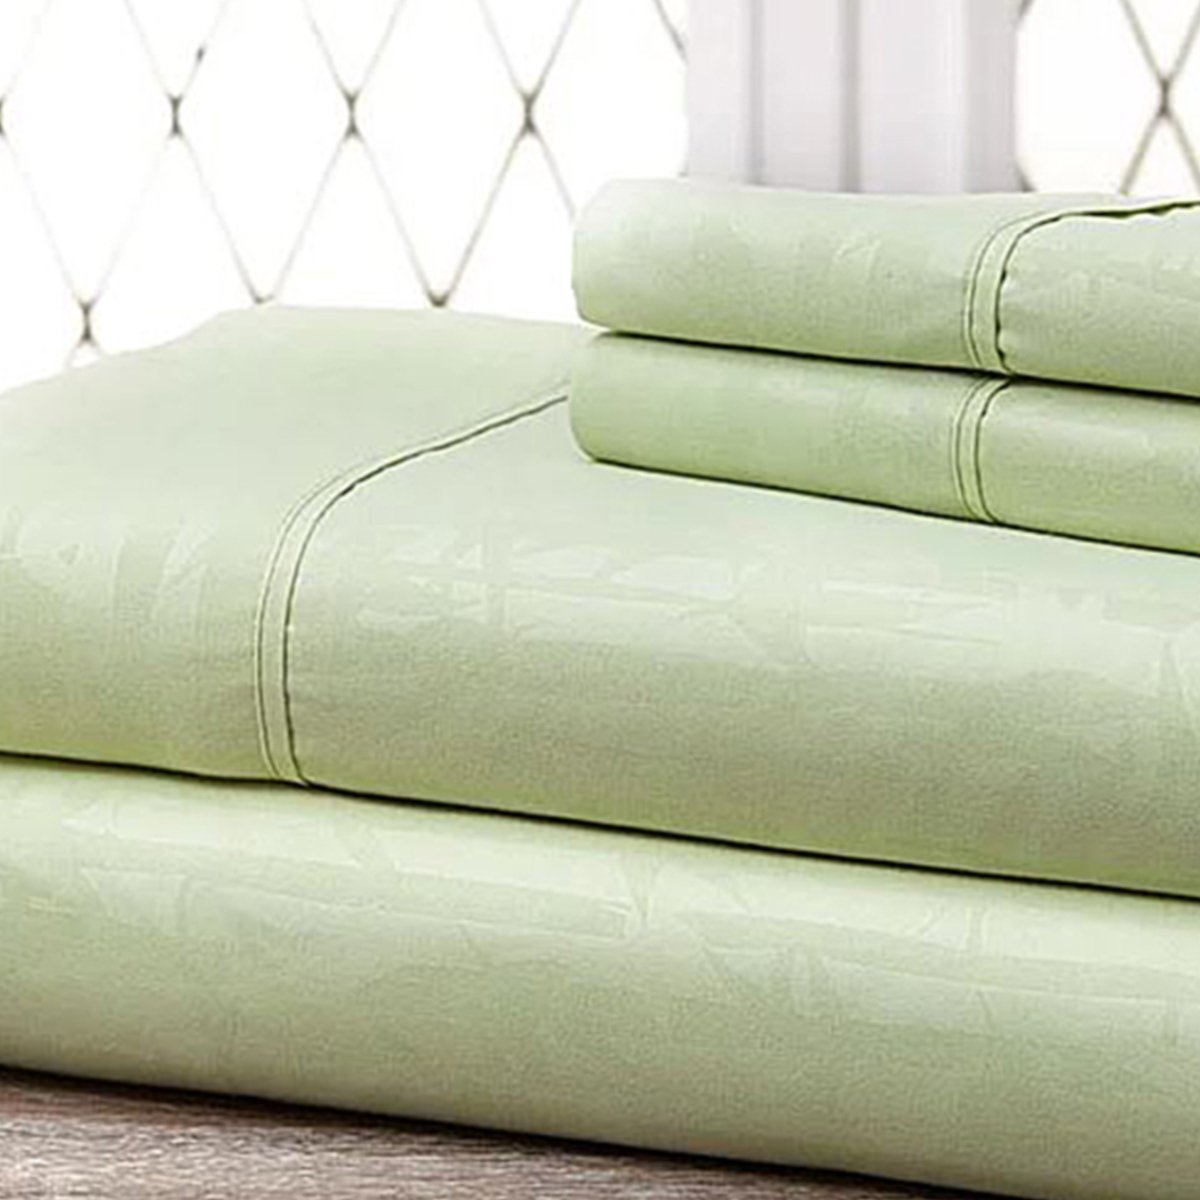 Hny-4pc-eb-sag-f Super-soft 1600 Series Bamboo Embossed Bed Sheet, Sage - Full, 4 Piece